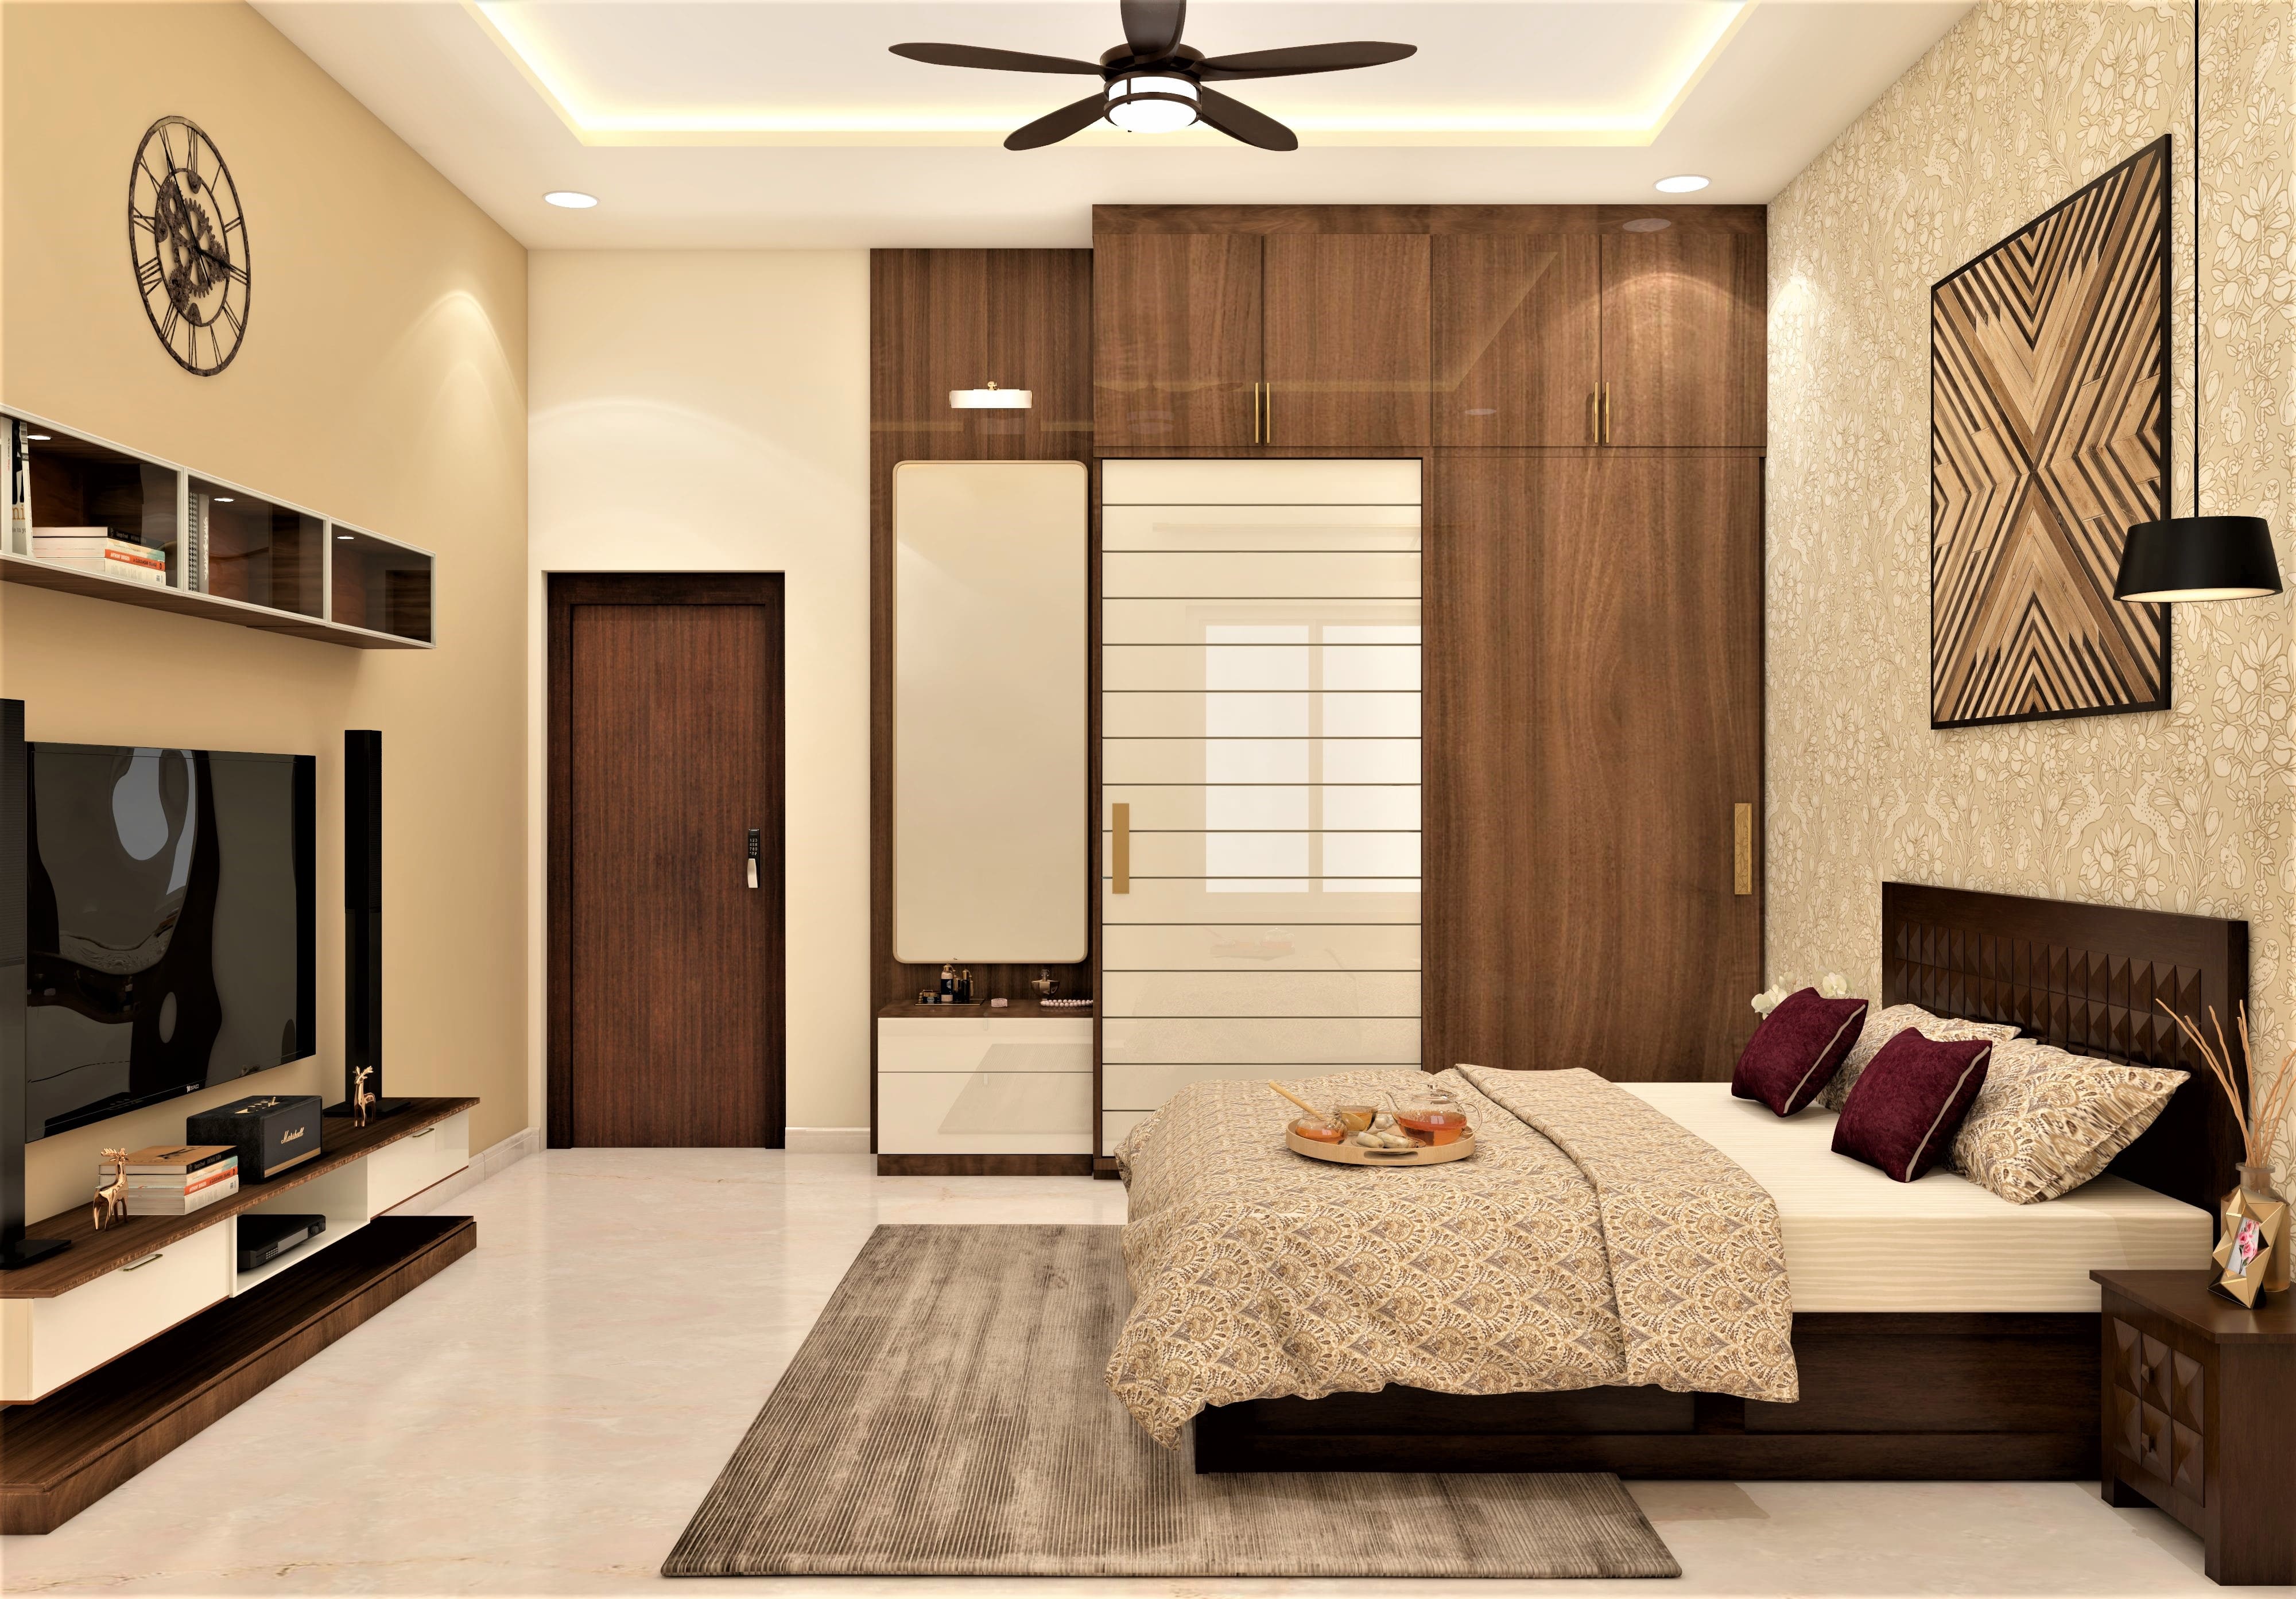 Spacious master bedroom design with rich wooden tones - Beautiful Homes